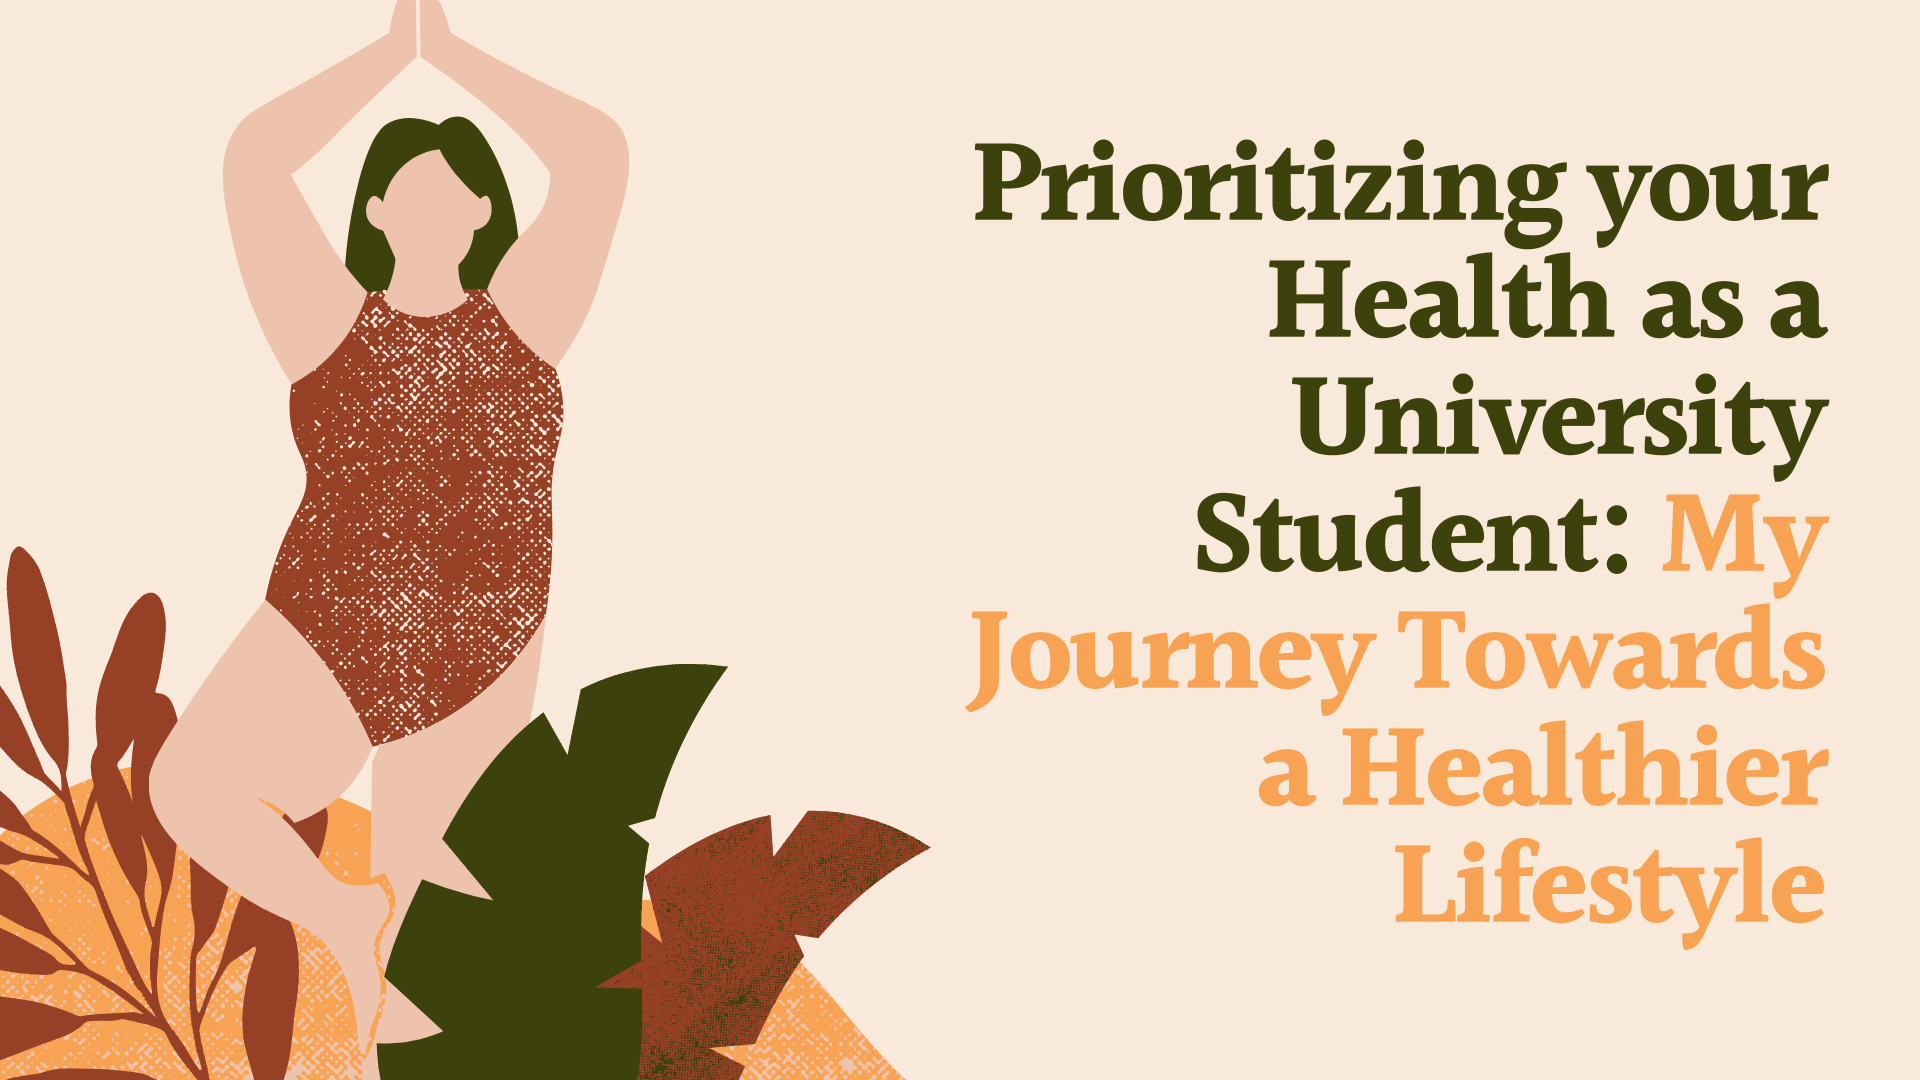 prioritizing-your-health-as-a-university-student-my-journey-towards-a-healthier-lifestyle-1dmvdgjurkilhi7u0hot1fa.png